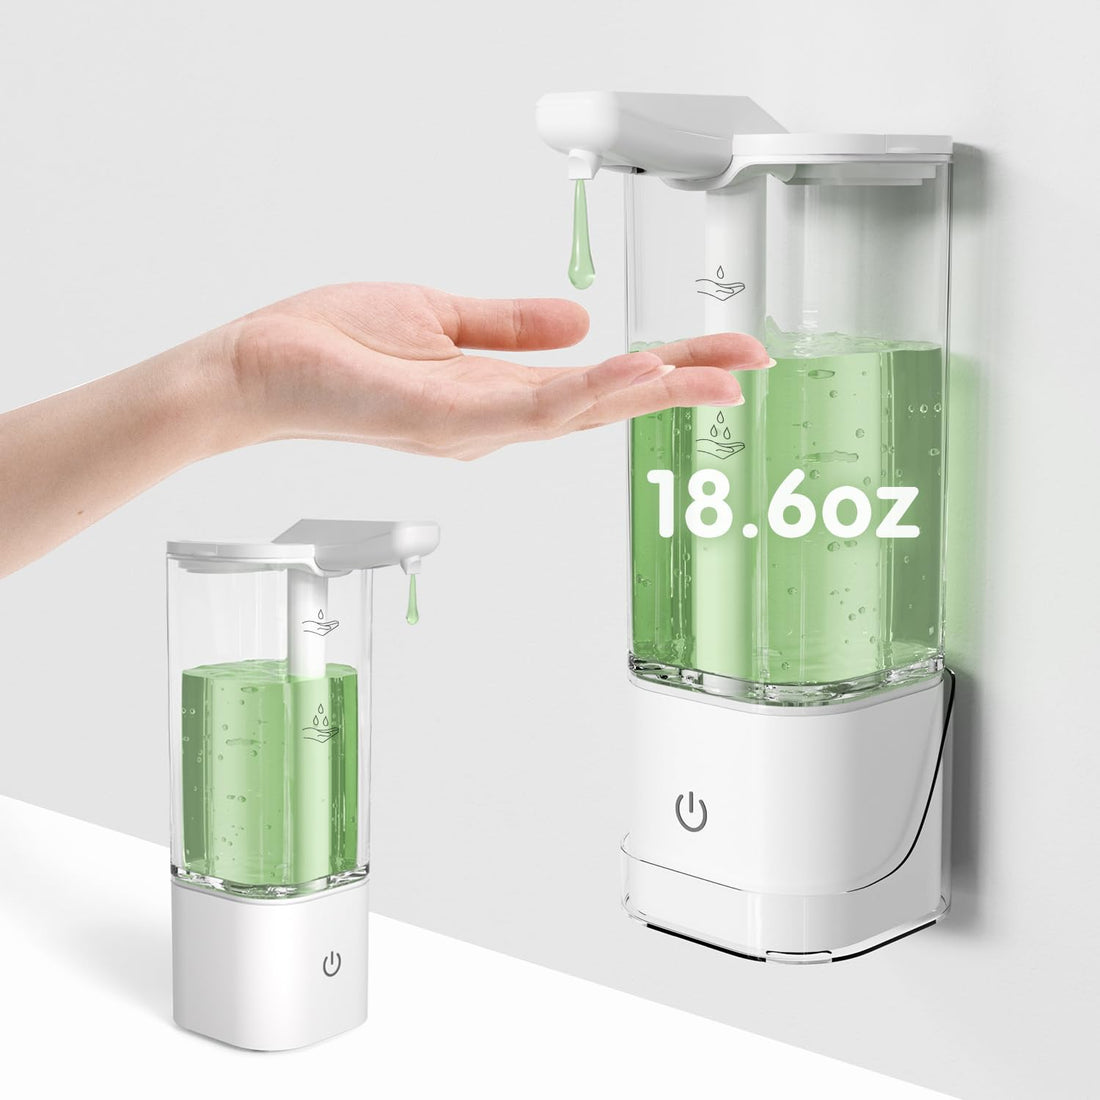 18.6oz Automatic Liquid Soap Dispenser,Touchless Hand Sanitizer Dispenser,USB C Rechargeable Hand Soap Dispensing Volume Perfect for Kitchen Sink or Bathroom Commercial Xmas Gift with Wall Holder